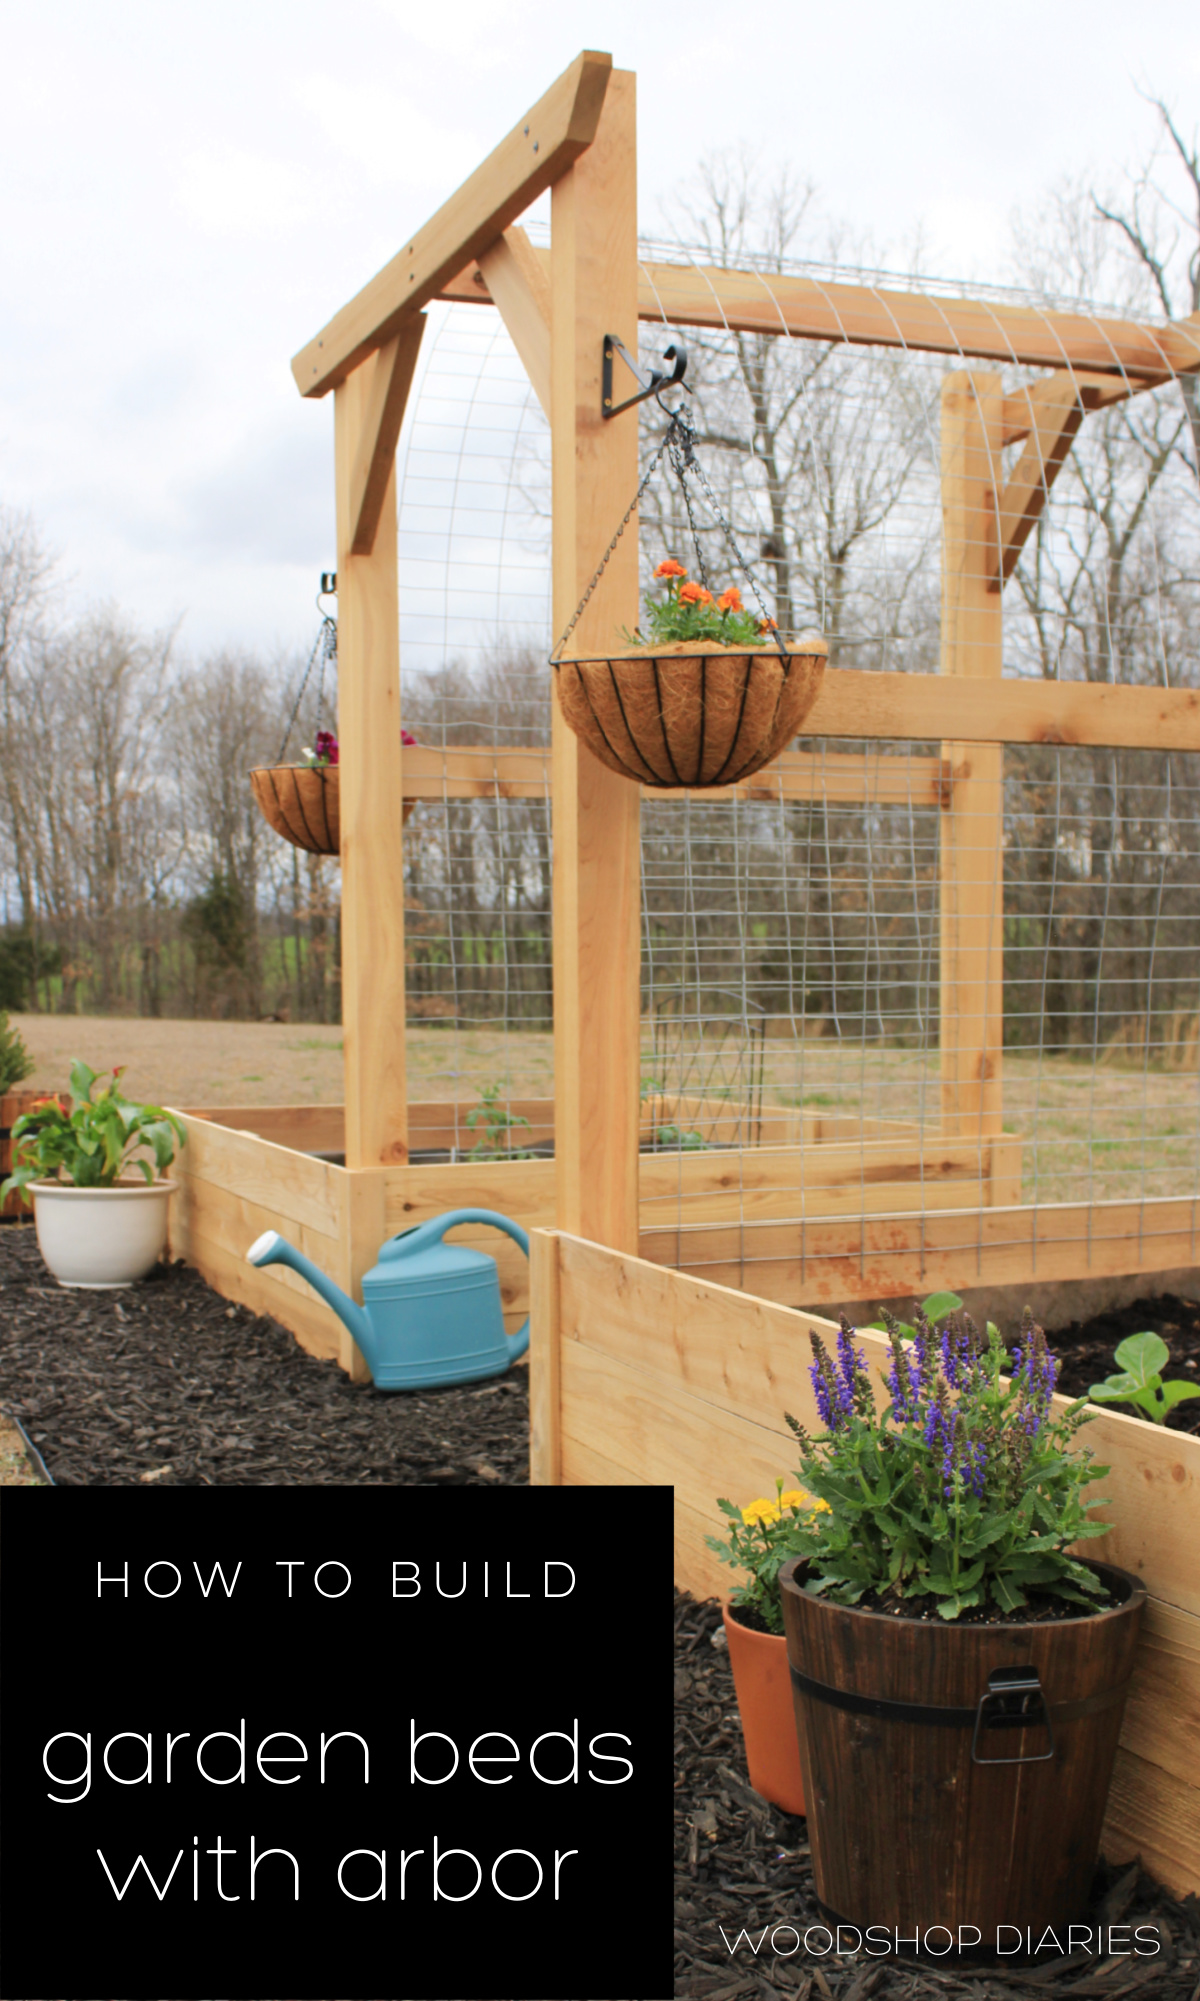 DIY garden beds with mulch and flowers and arbor with text "how to build garden beds with arbor" at bottom corner